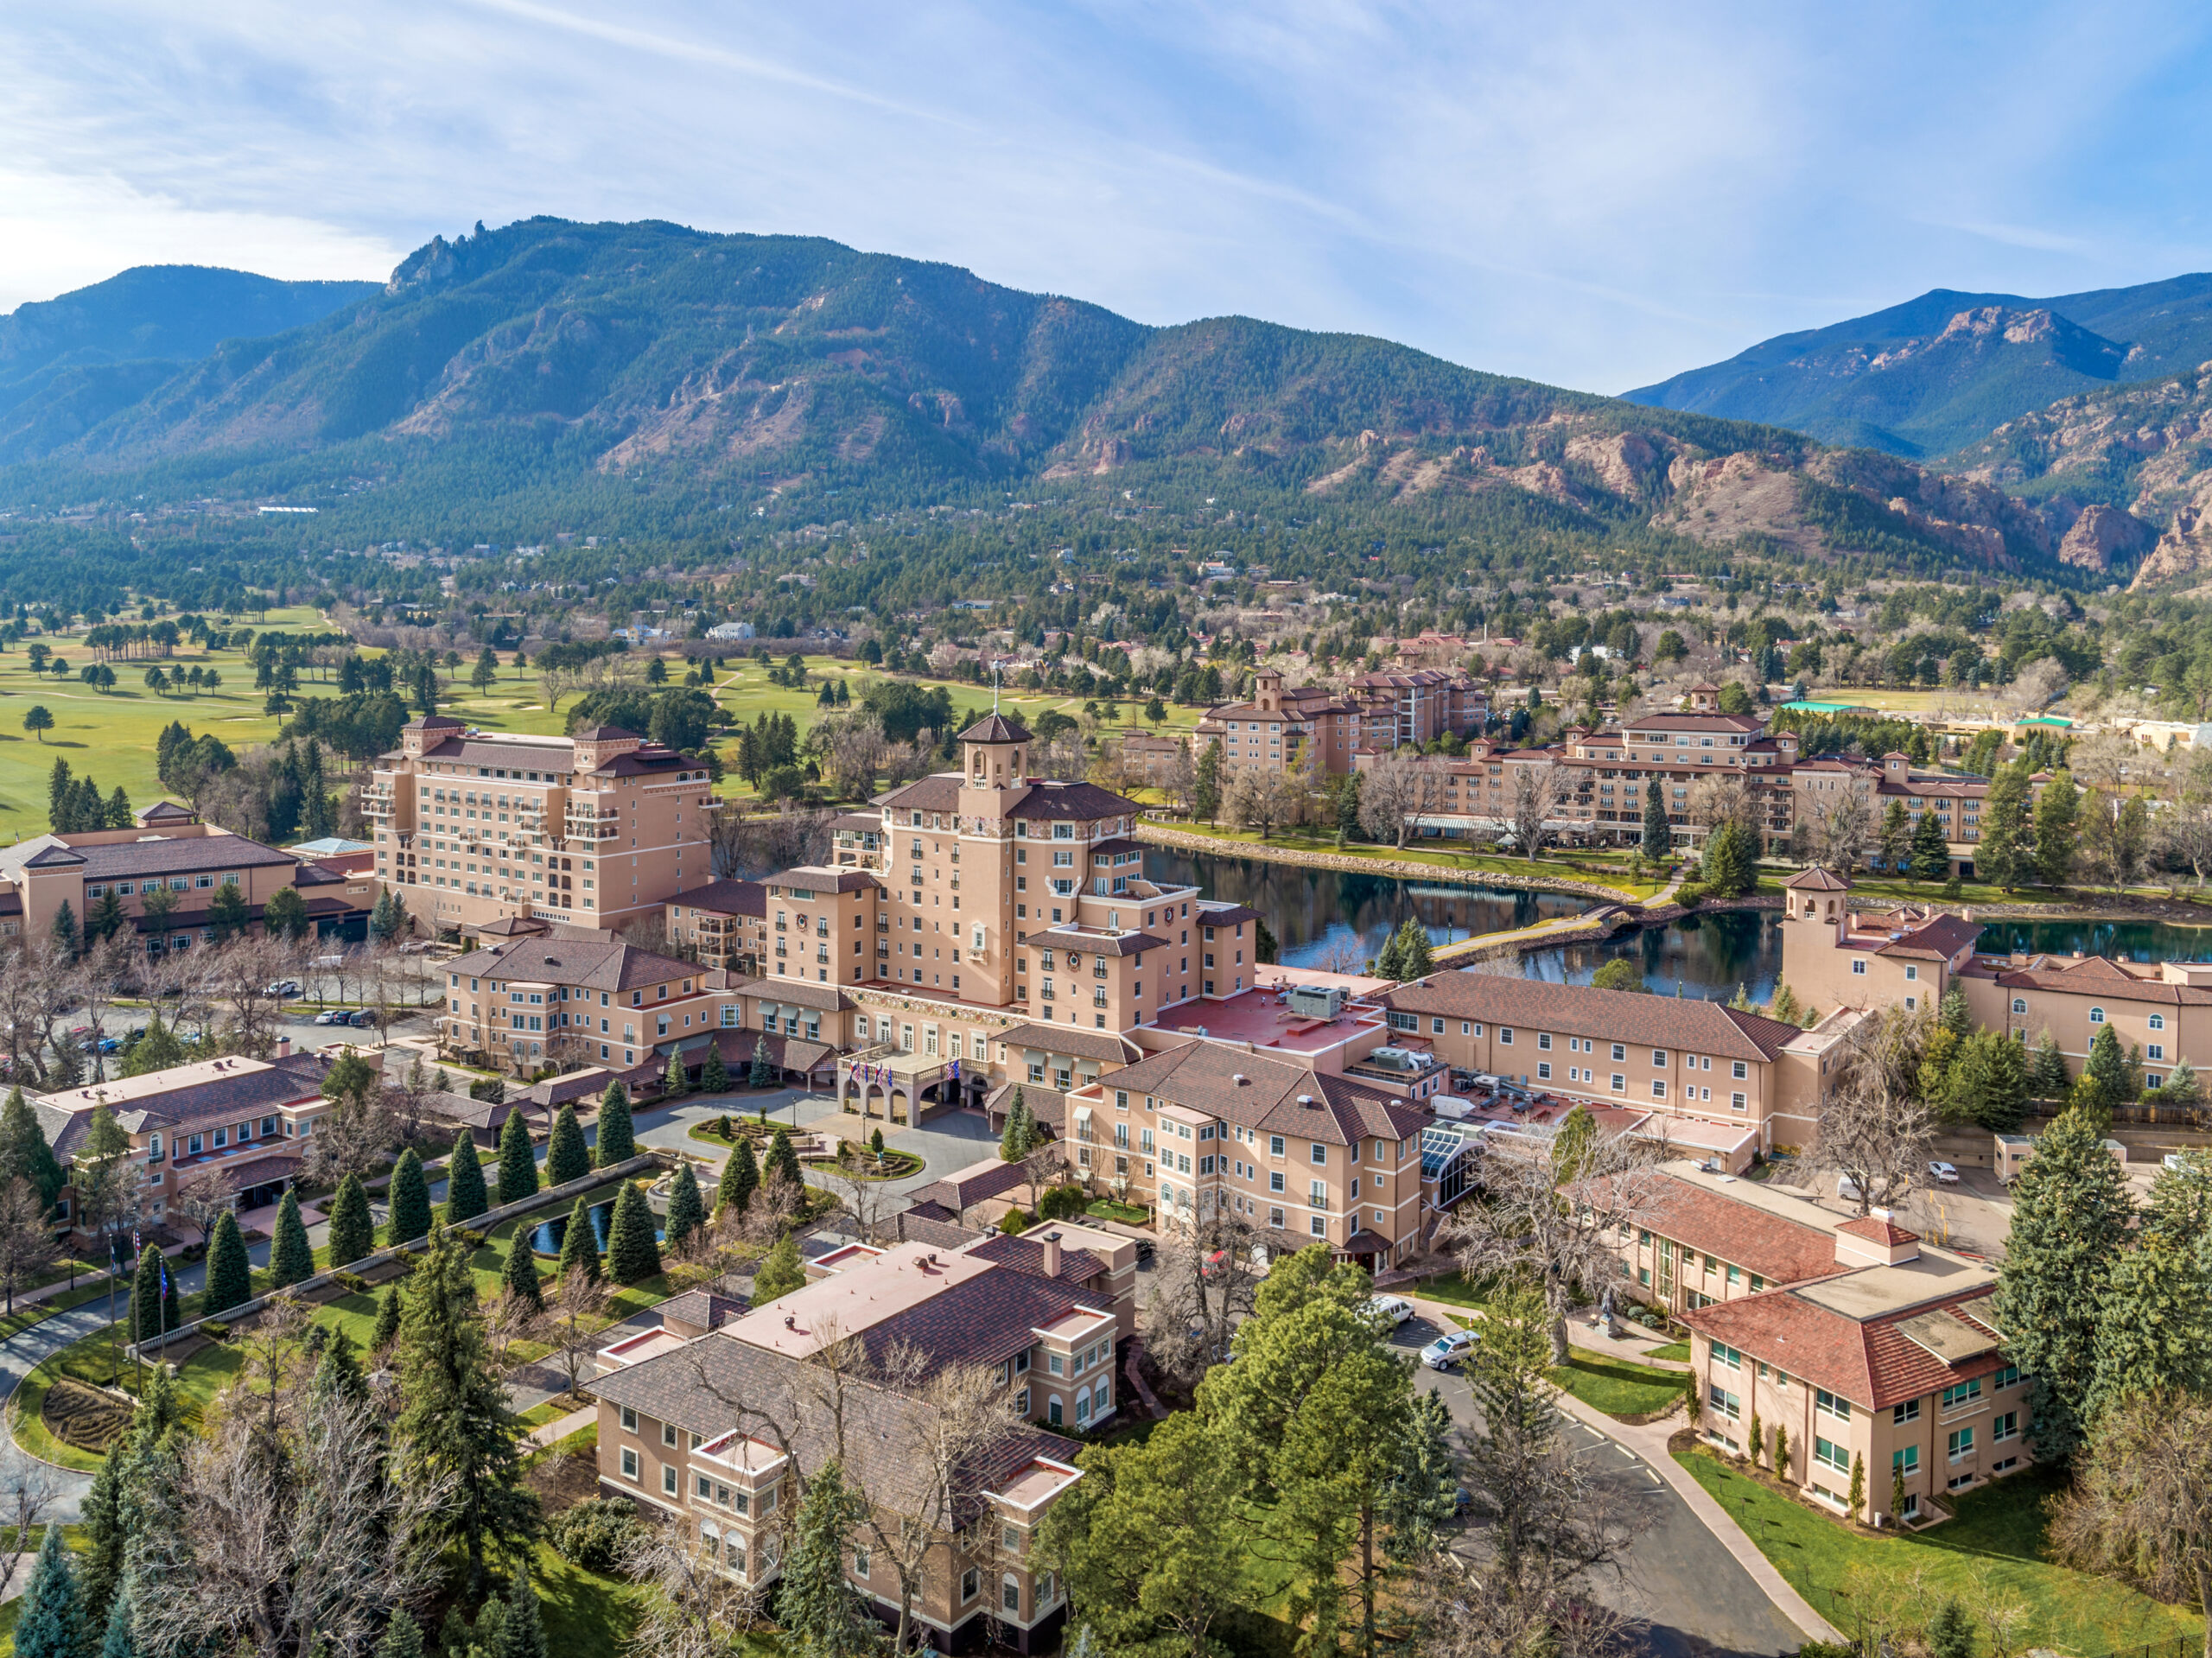 The Broadmoor Campus in Colorado. Mountains are in the background